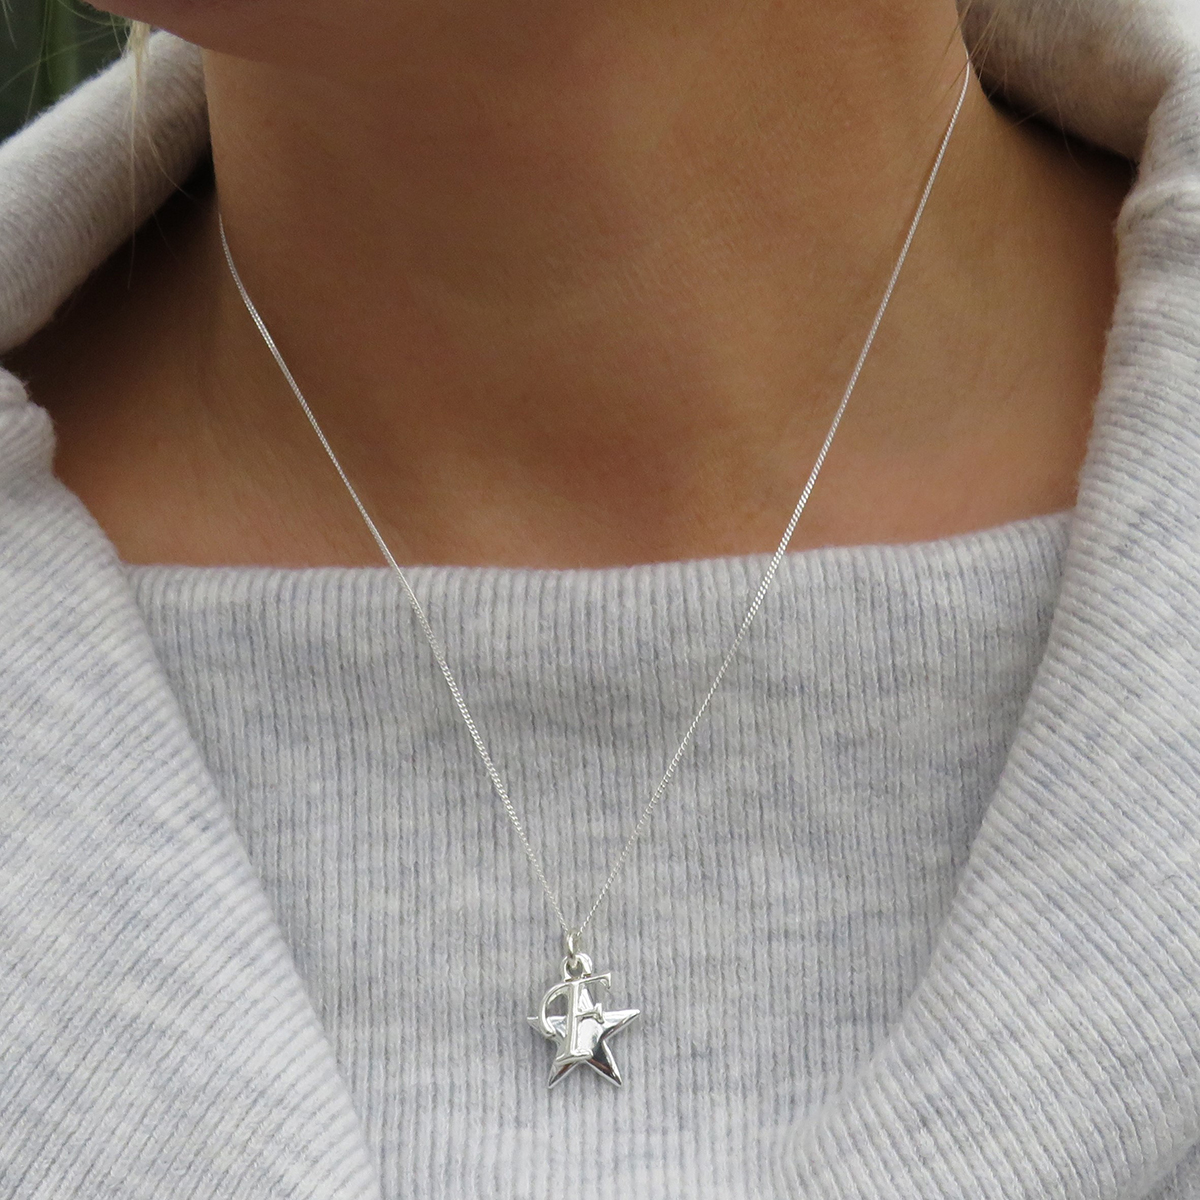 Personalised Charm Necklace - Any Initial